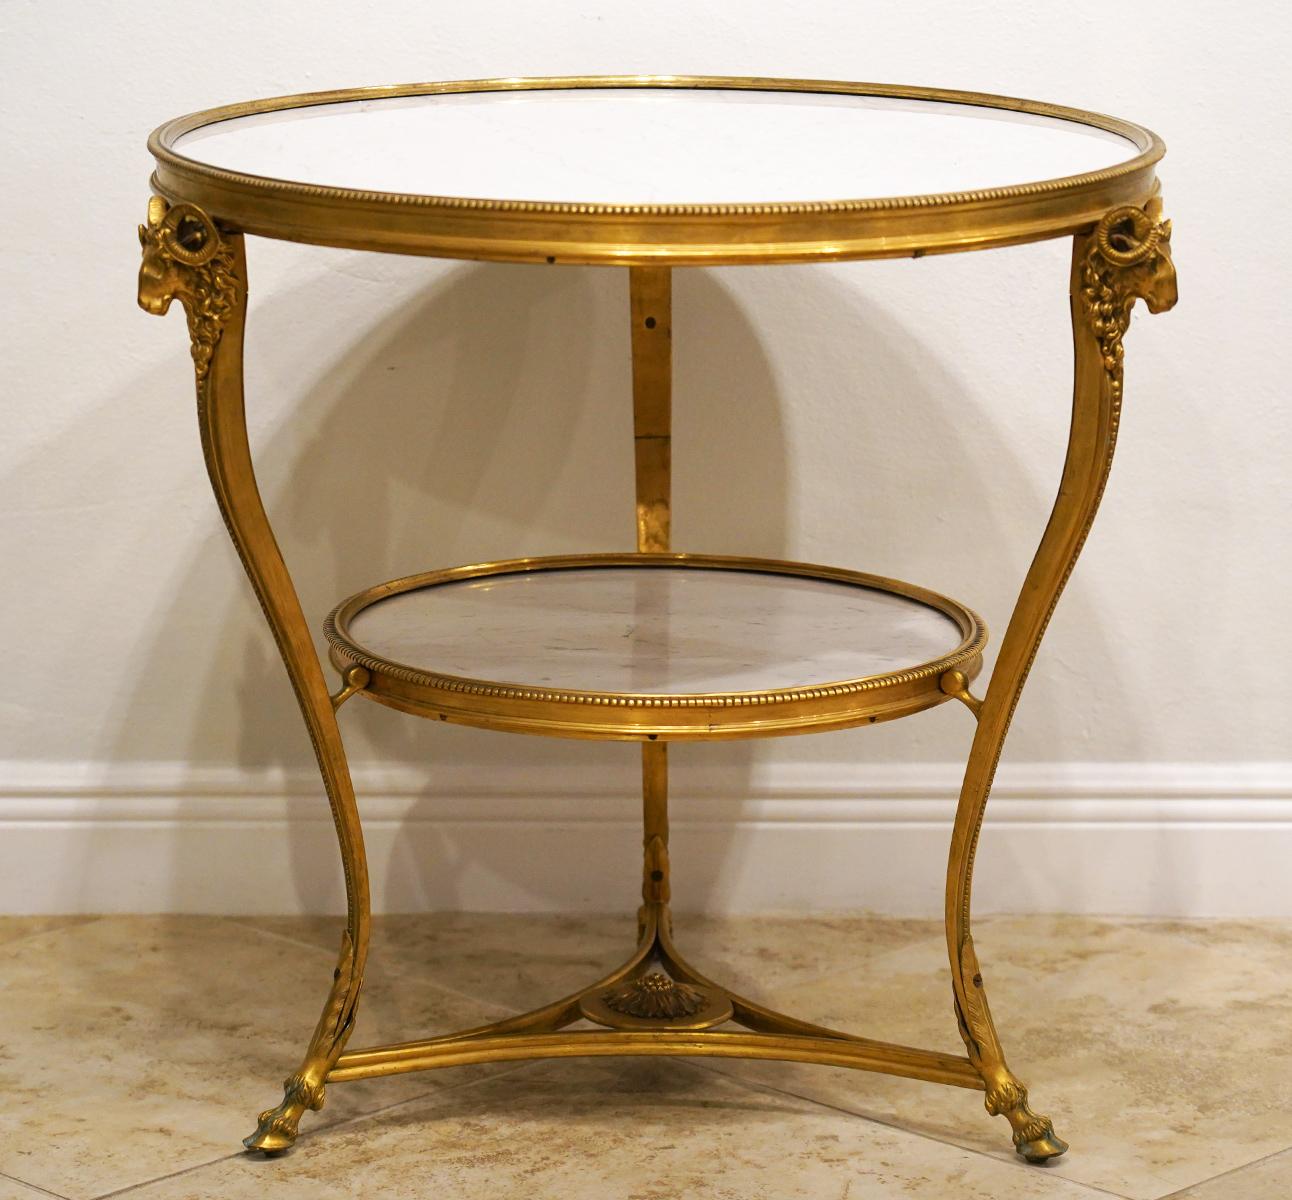 French Louis XV Style Gilt Bronze Marble-Top Guéridon Tables, 19th Century, Pair 3